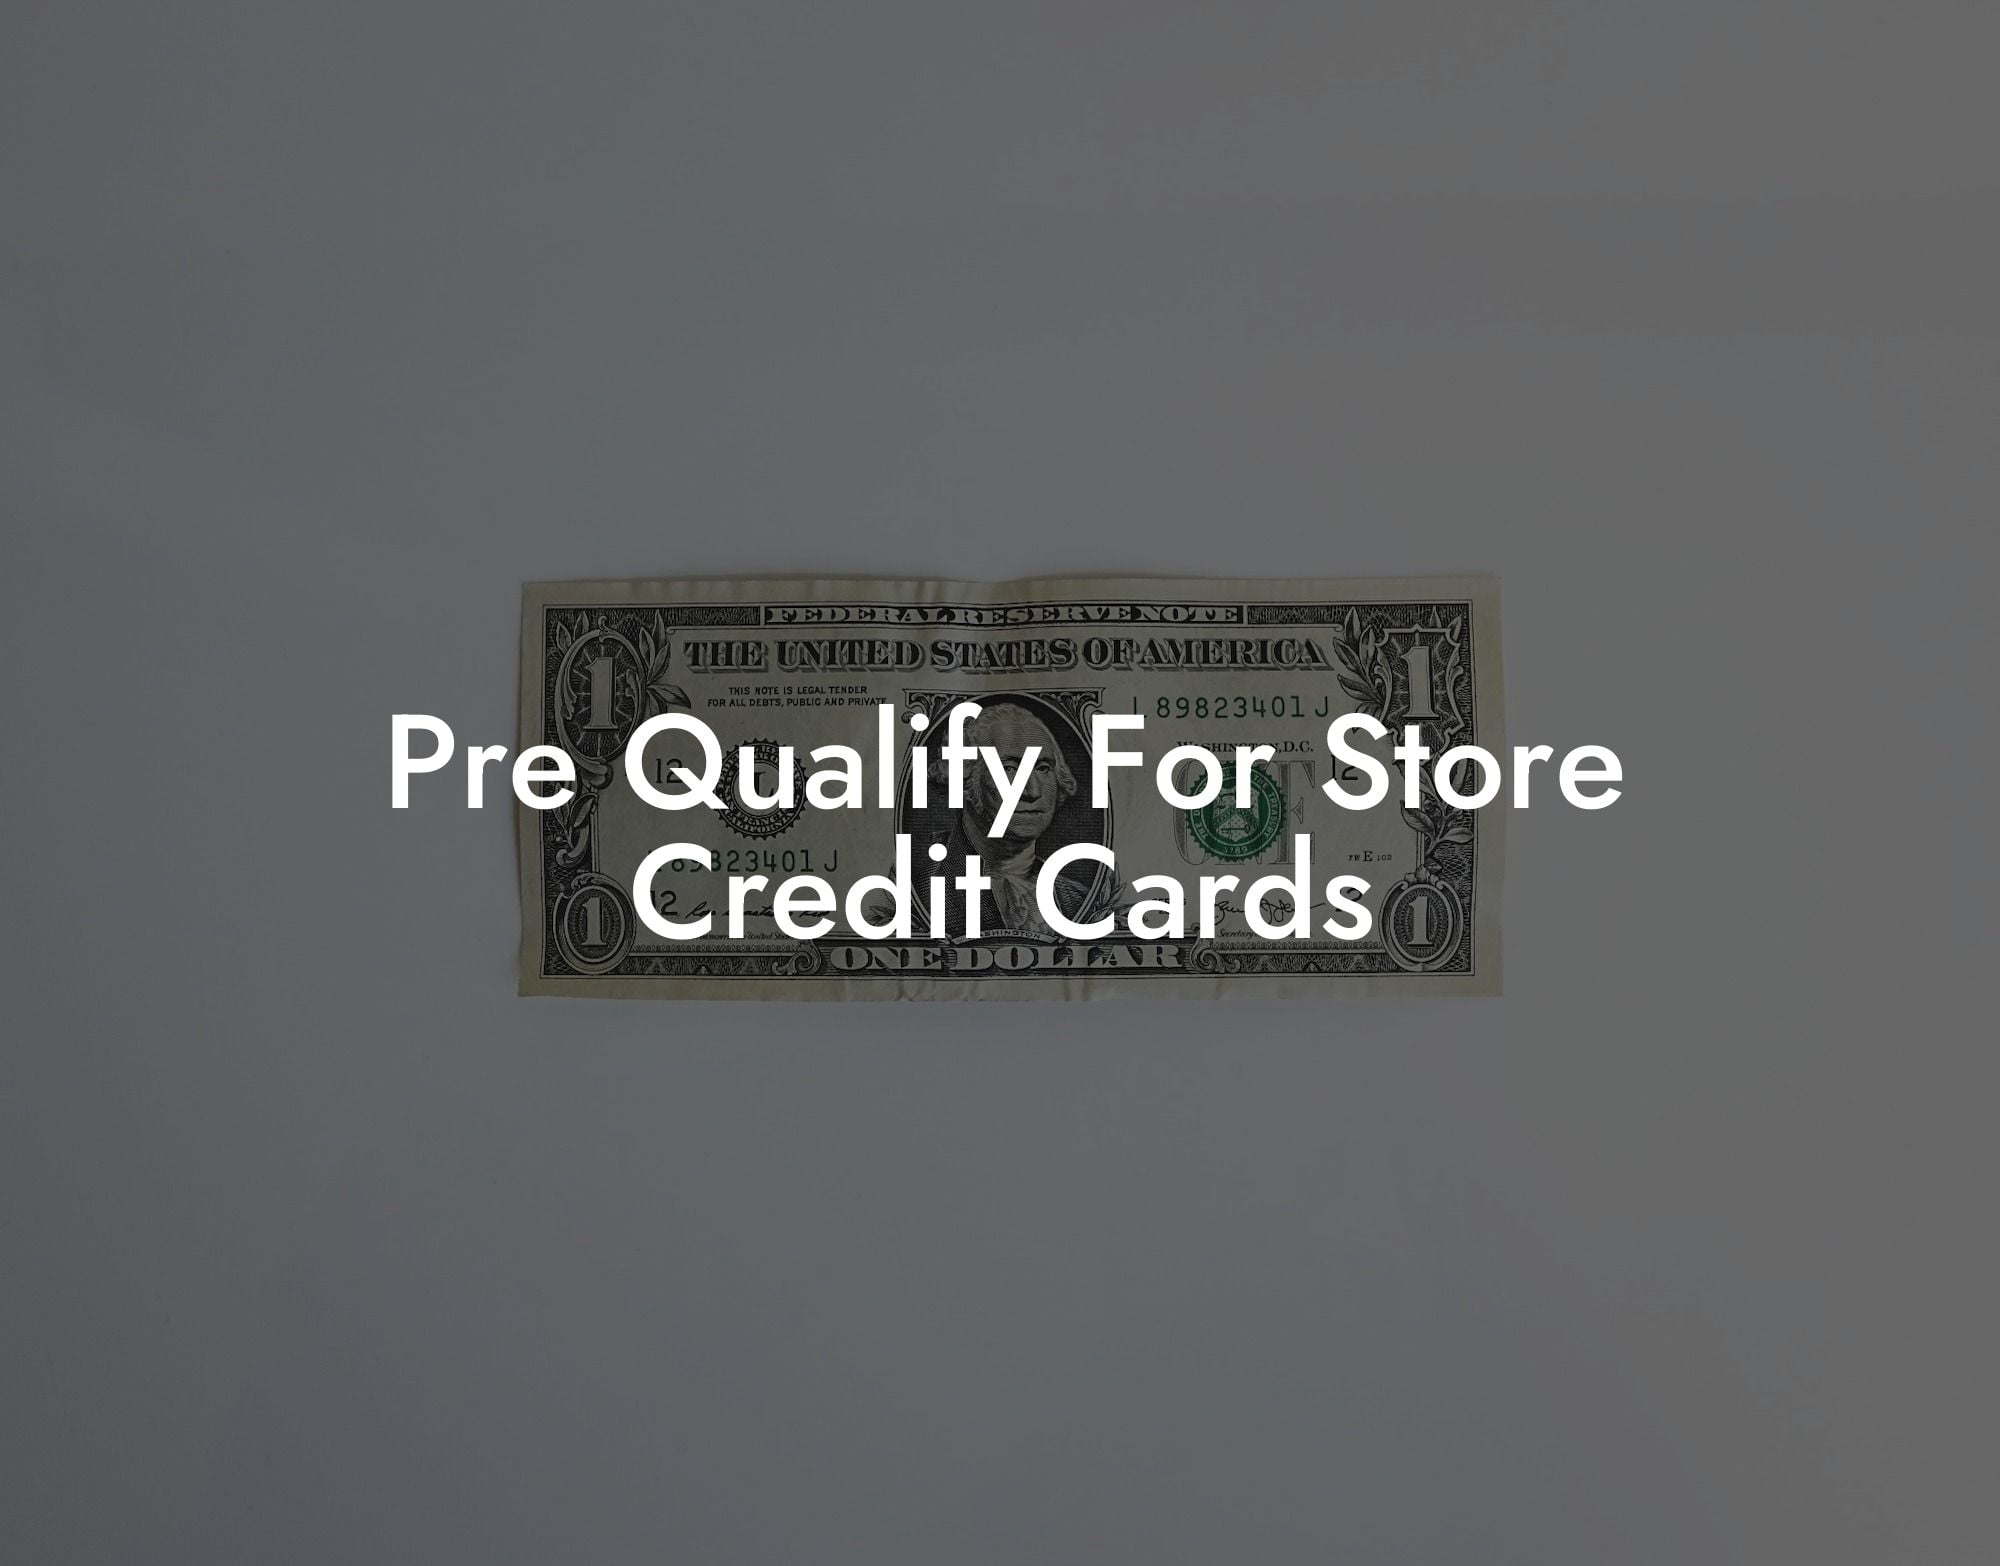 Pre Qualify For Store Credit Cards